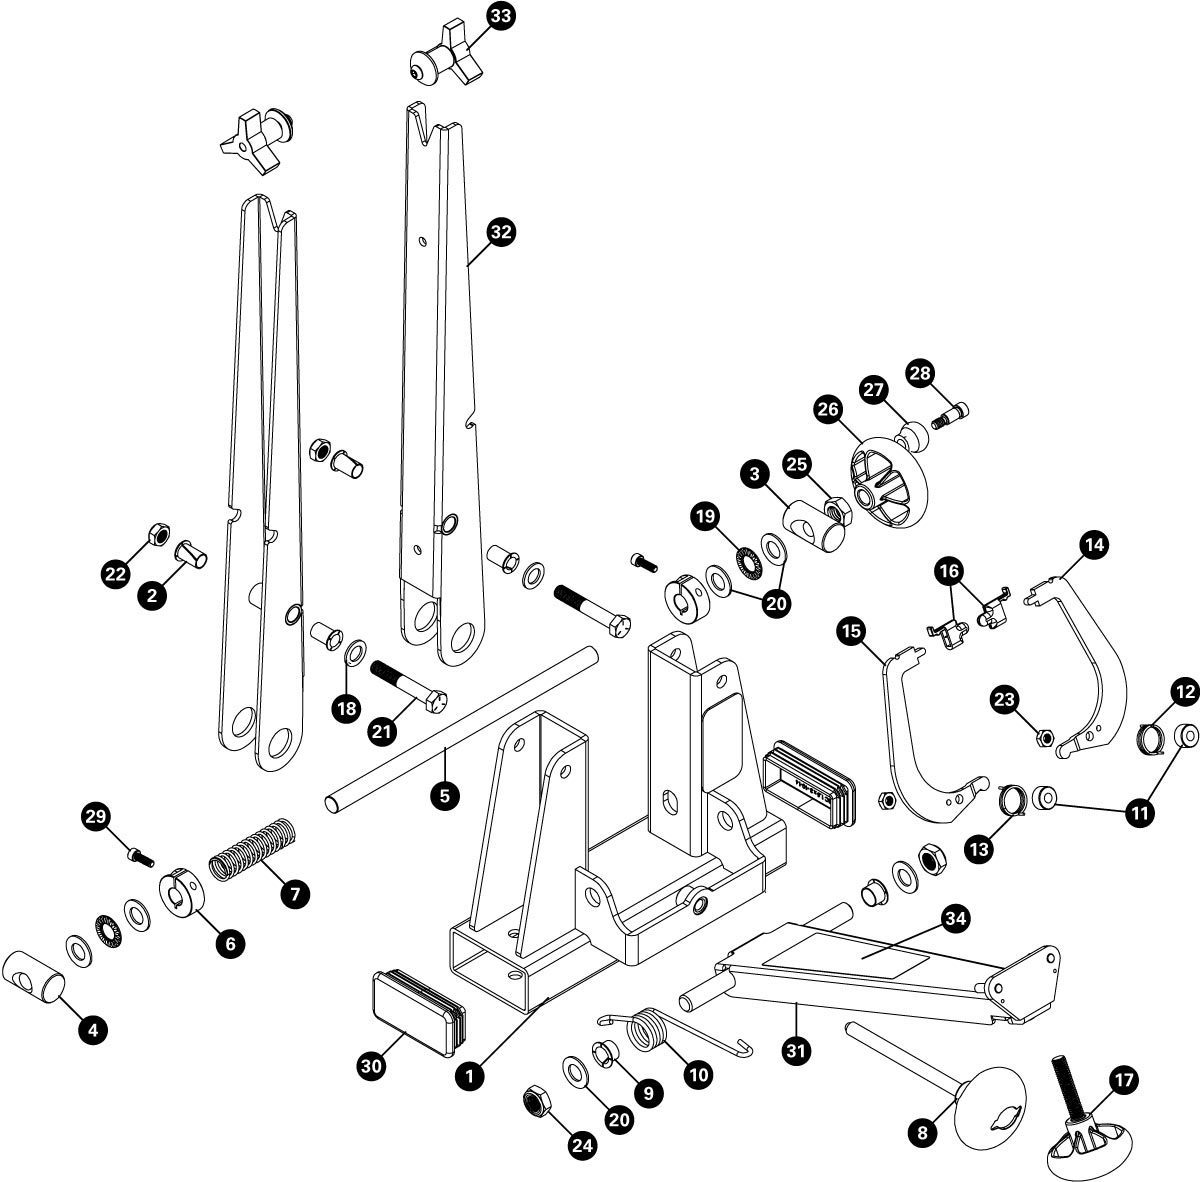 Parts diagram for TS-2.3 Professional Wheel Truing Stand, click to enlarge